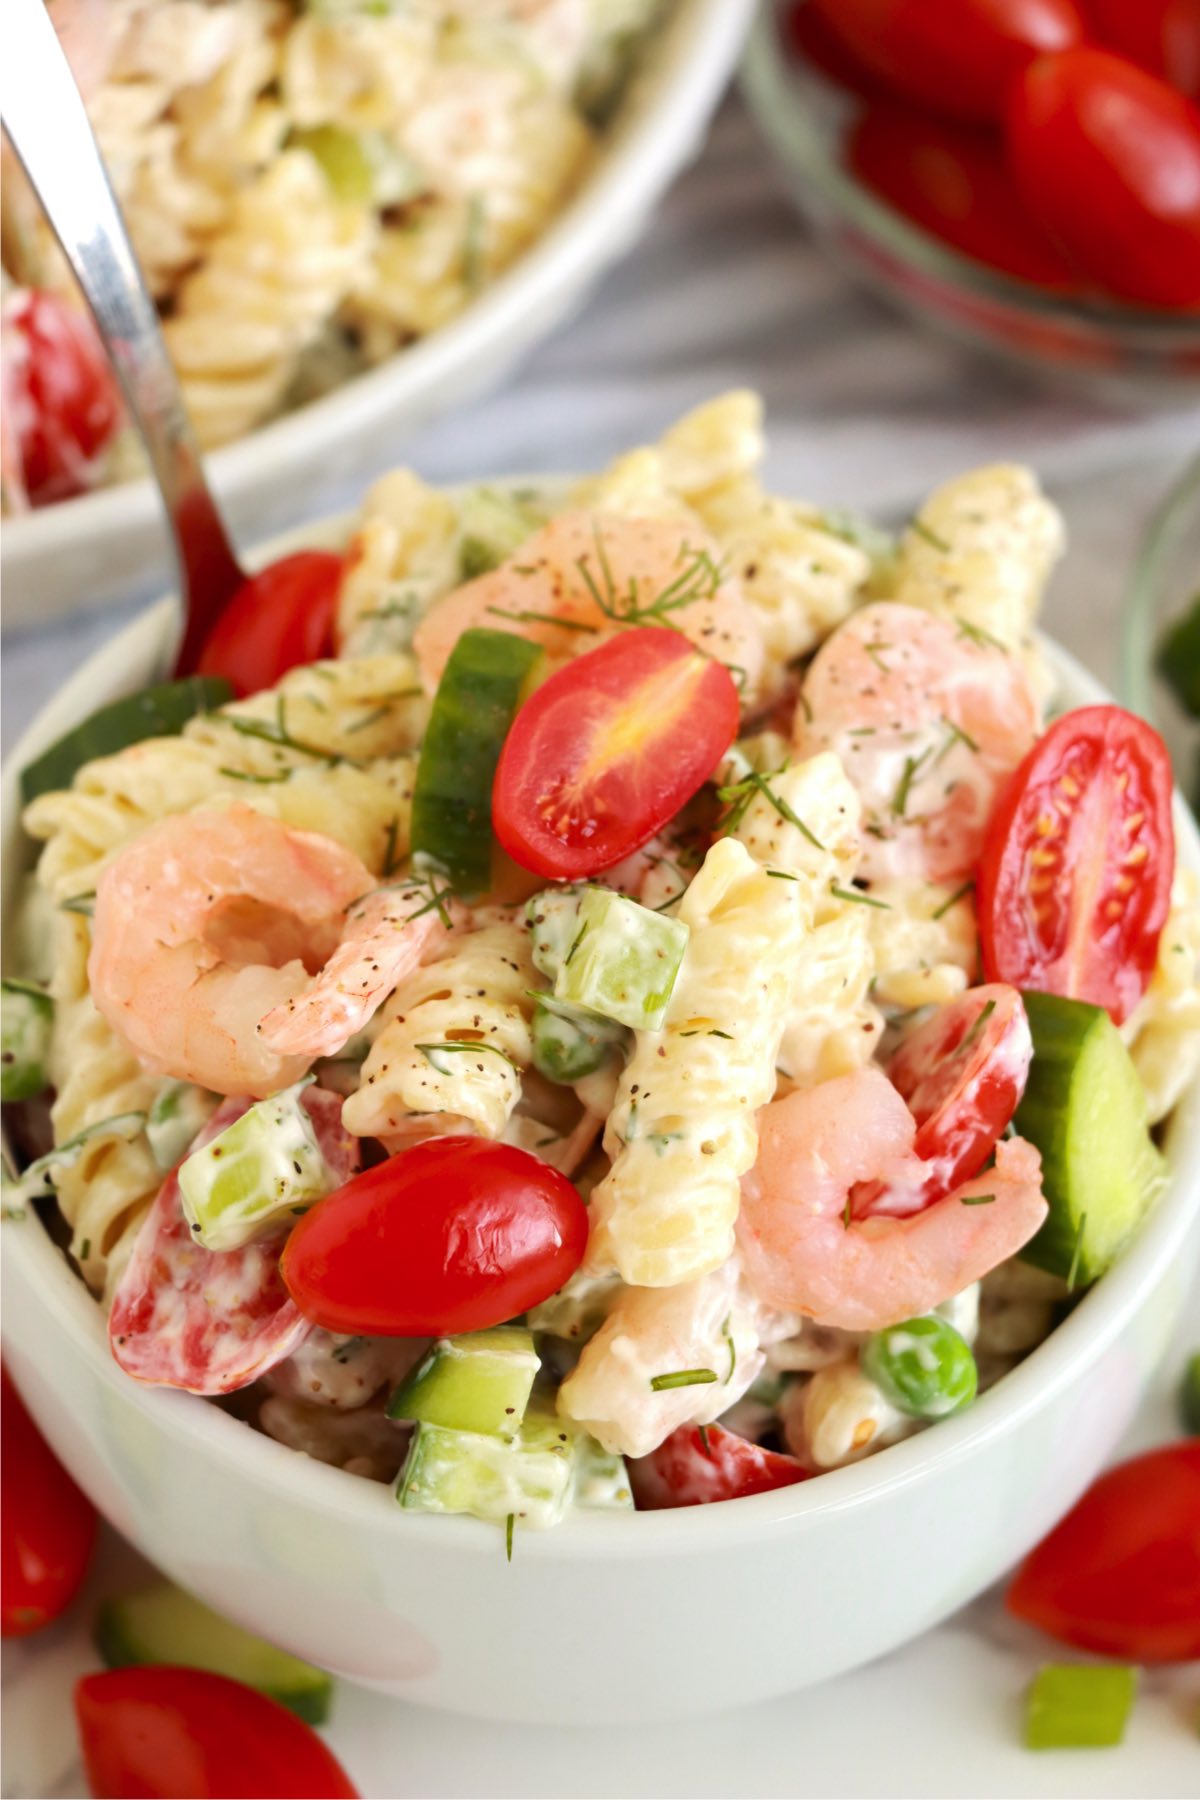 spoon in a bowl of pasta salad with tomatoes and shrimp